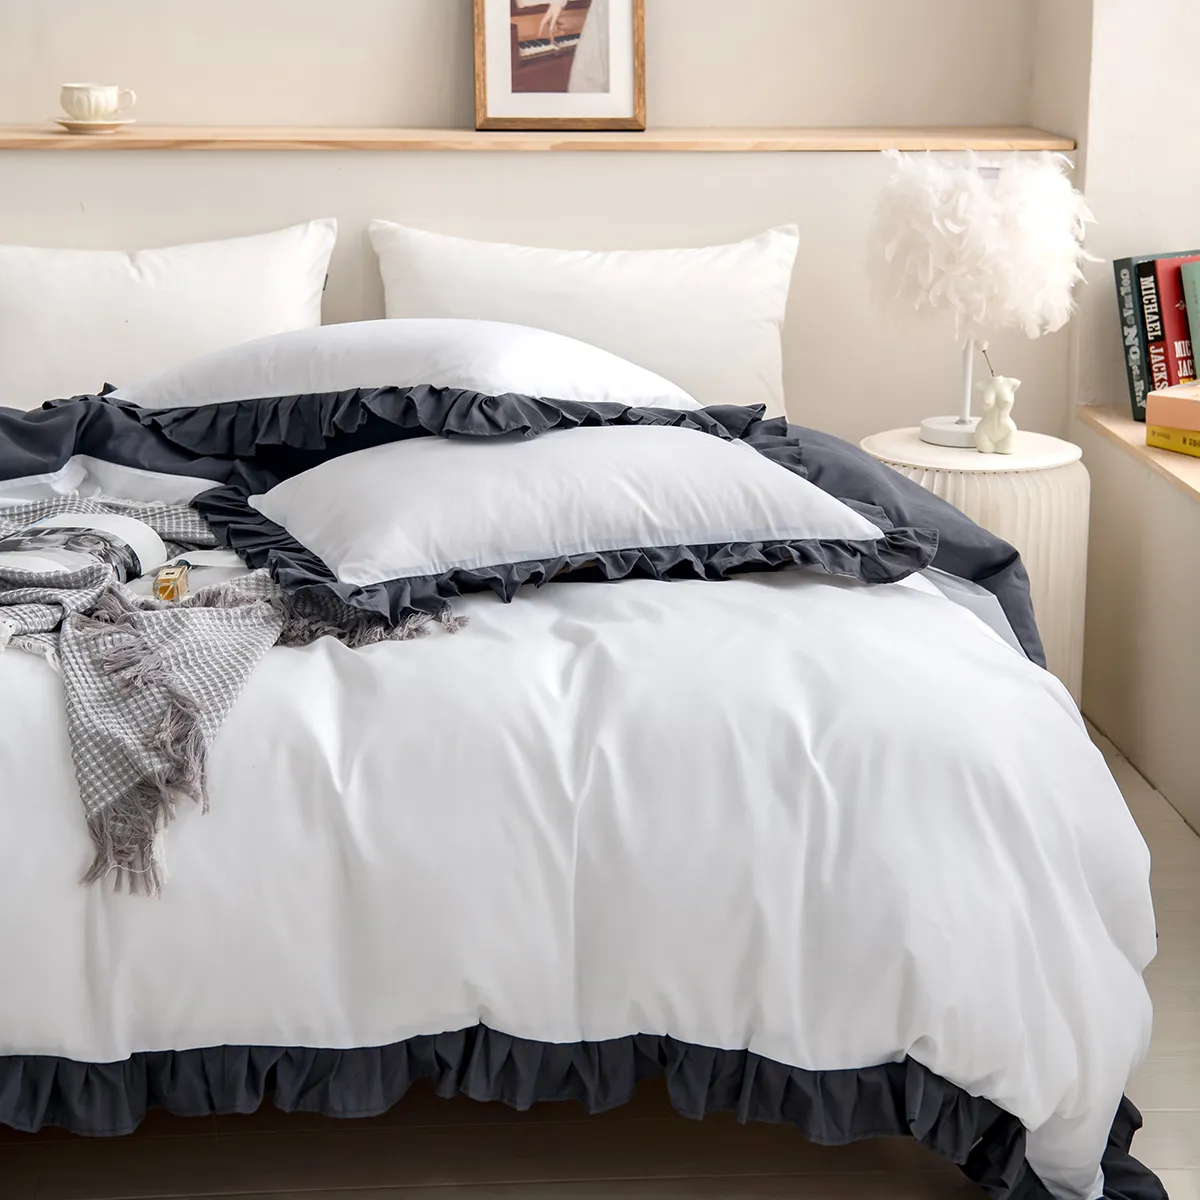 2/3pcs Soft and Comfortable Solid Color Bedding Set,including Duvet Cover and Pillowcases WARMGREY big image 1